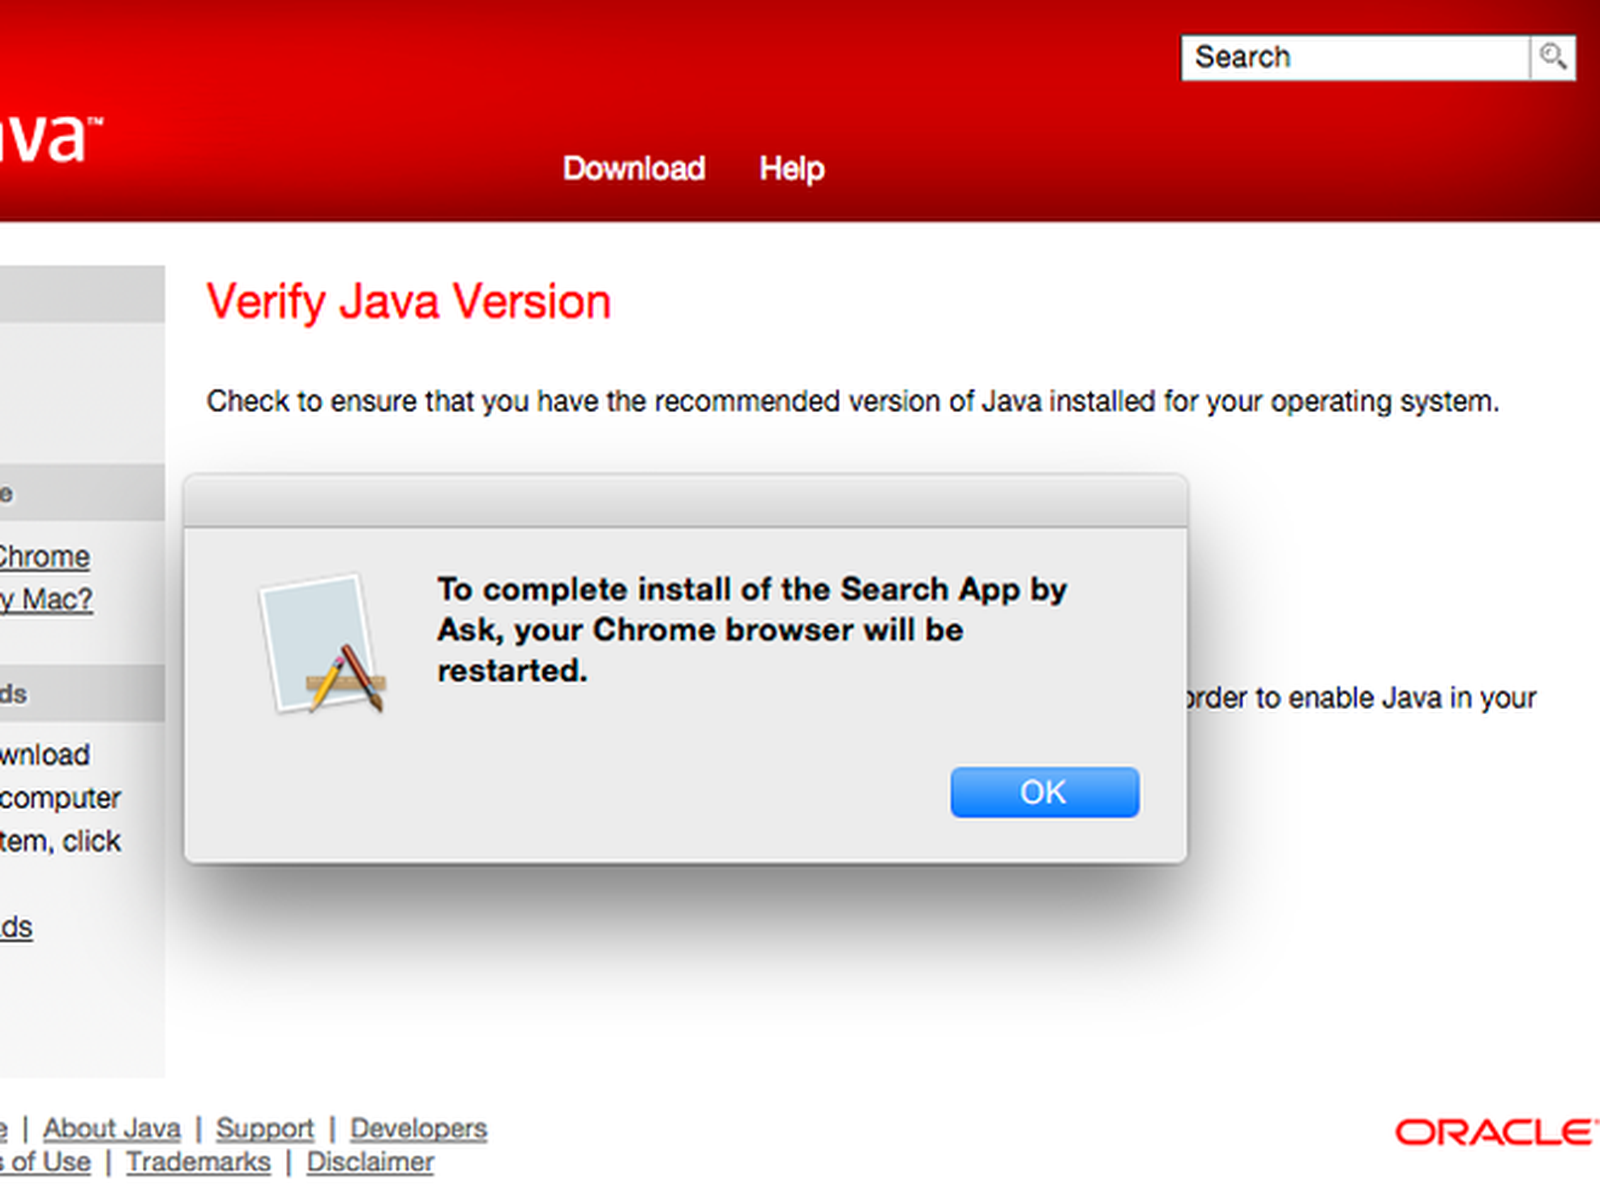 oracle java for mac download